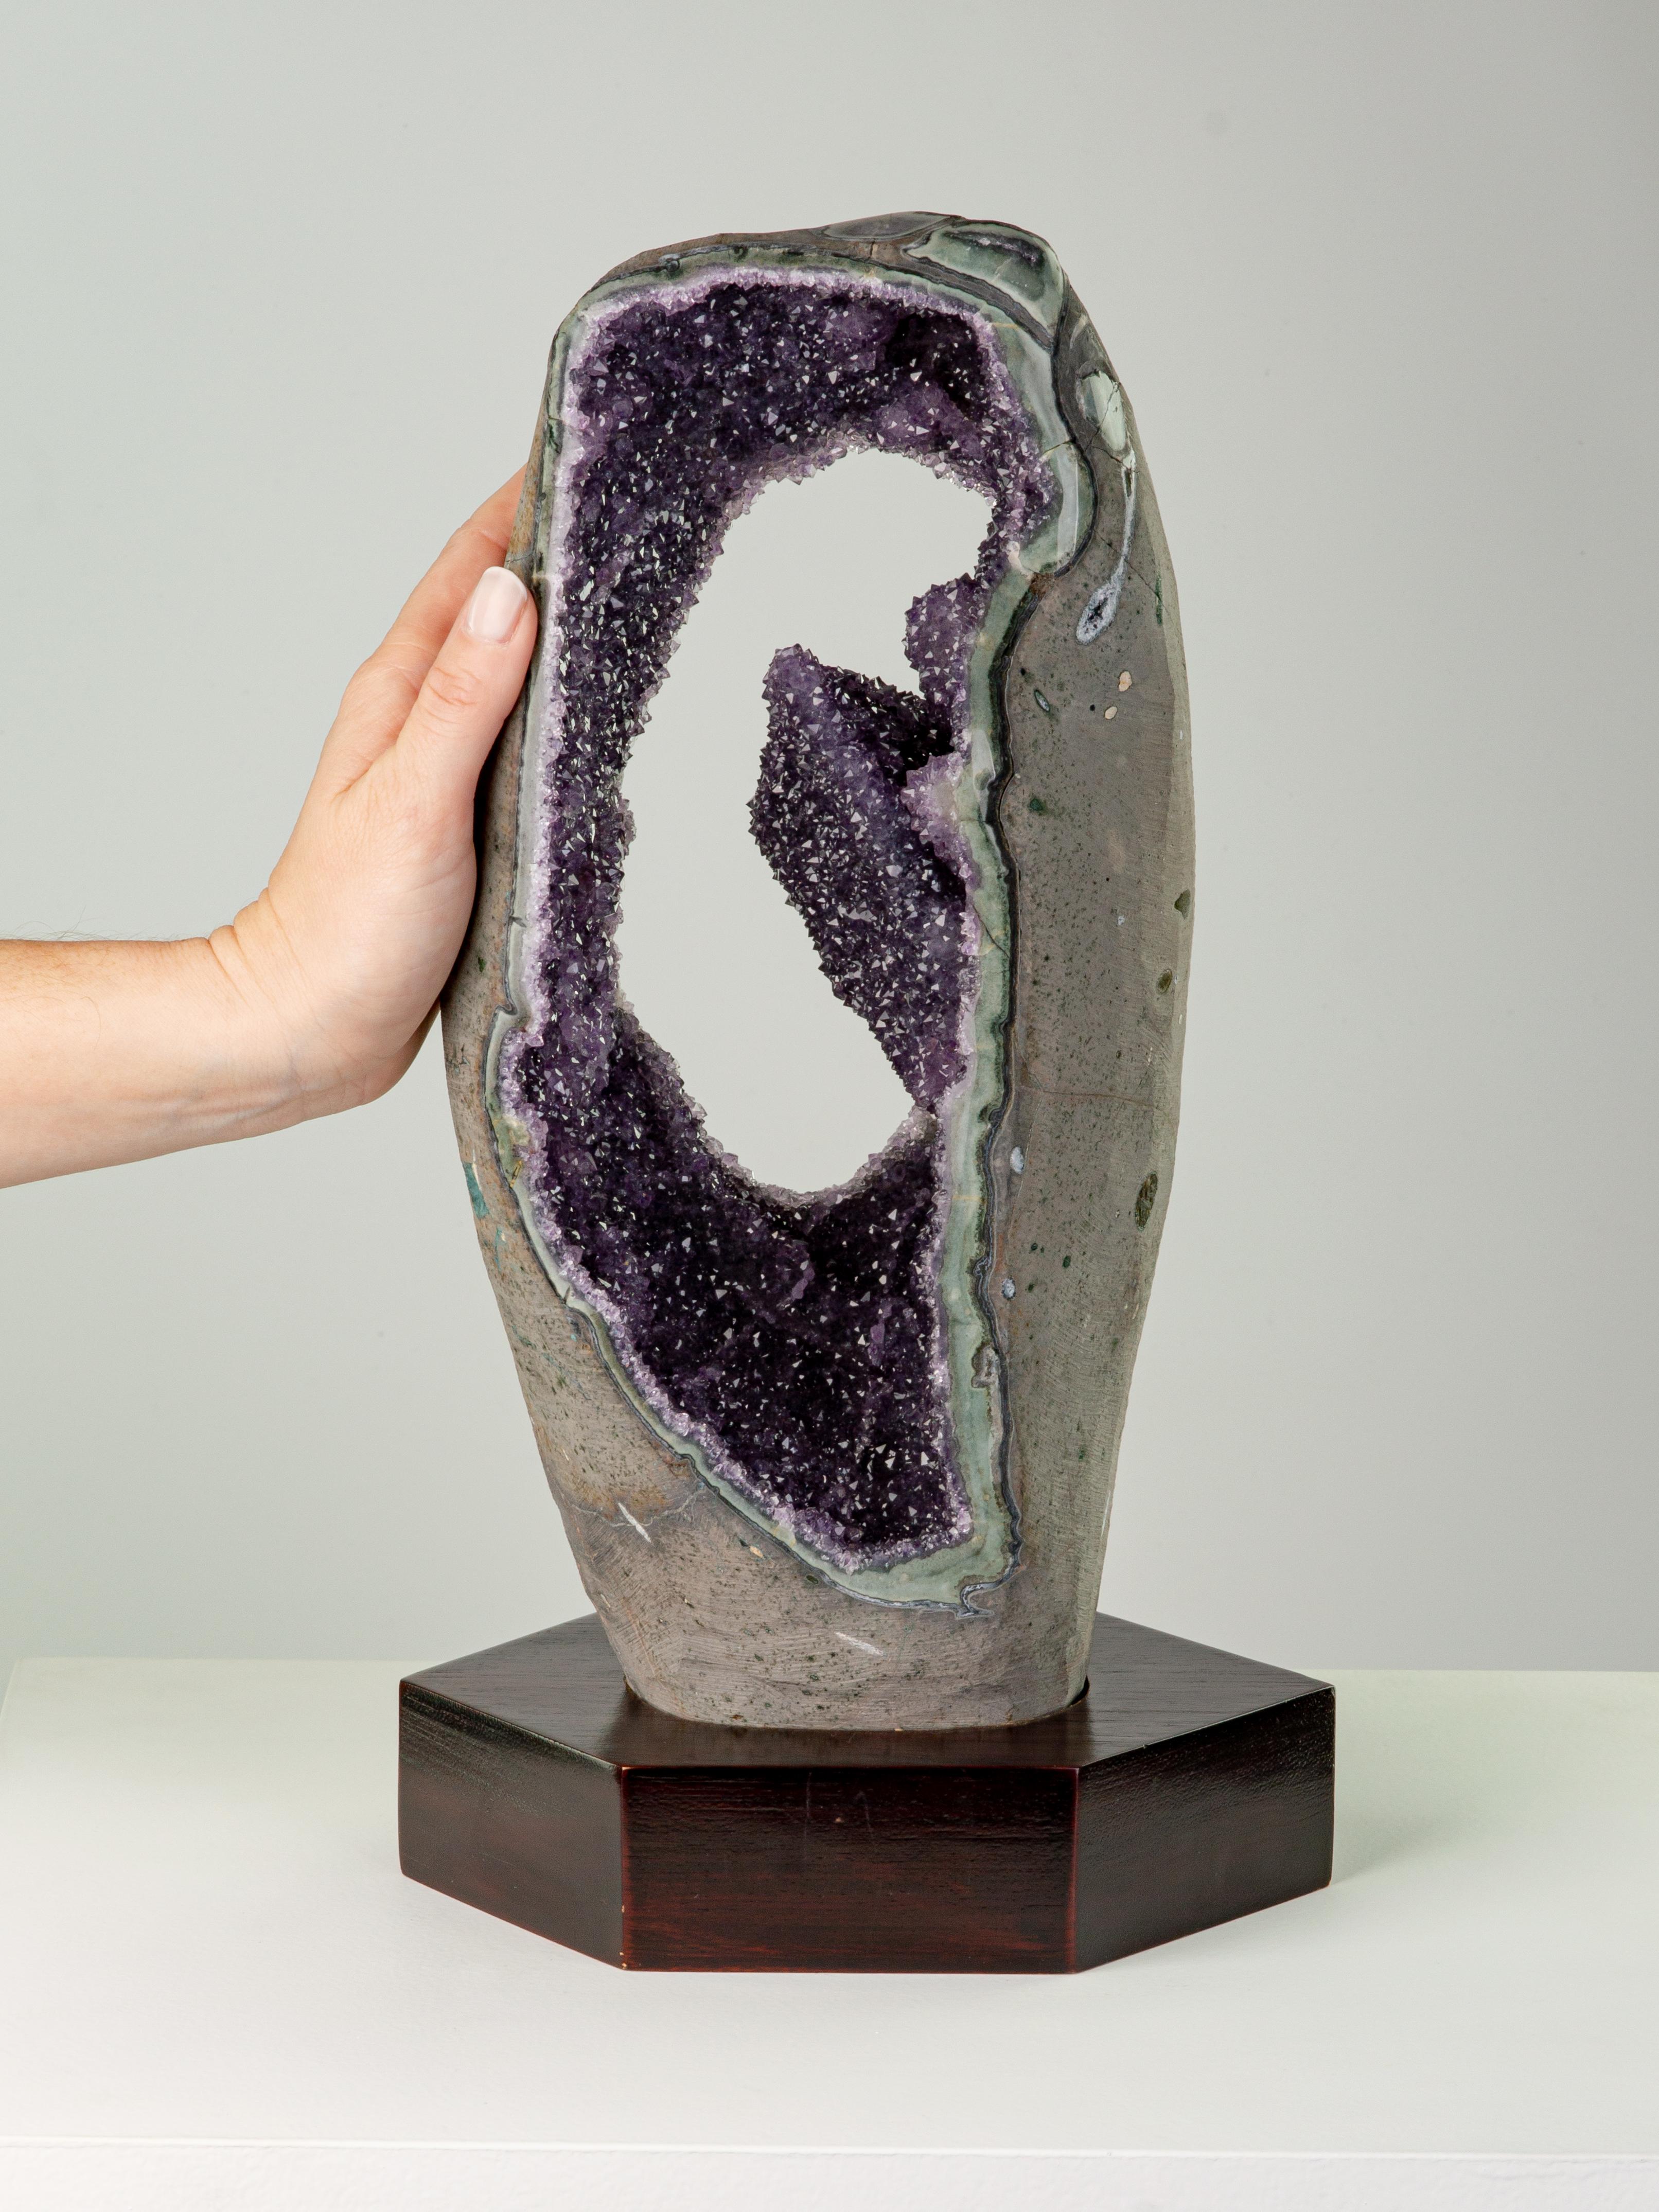 This striking section cut from the centre of a geode, contains an unusual formation of calcite with a blanket of amethyst crystals. The borders are polished to reveal the beautiful celadonite shell.

This piece was legally and ethically sourced